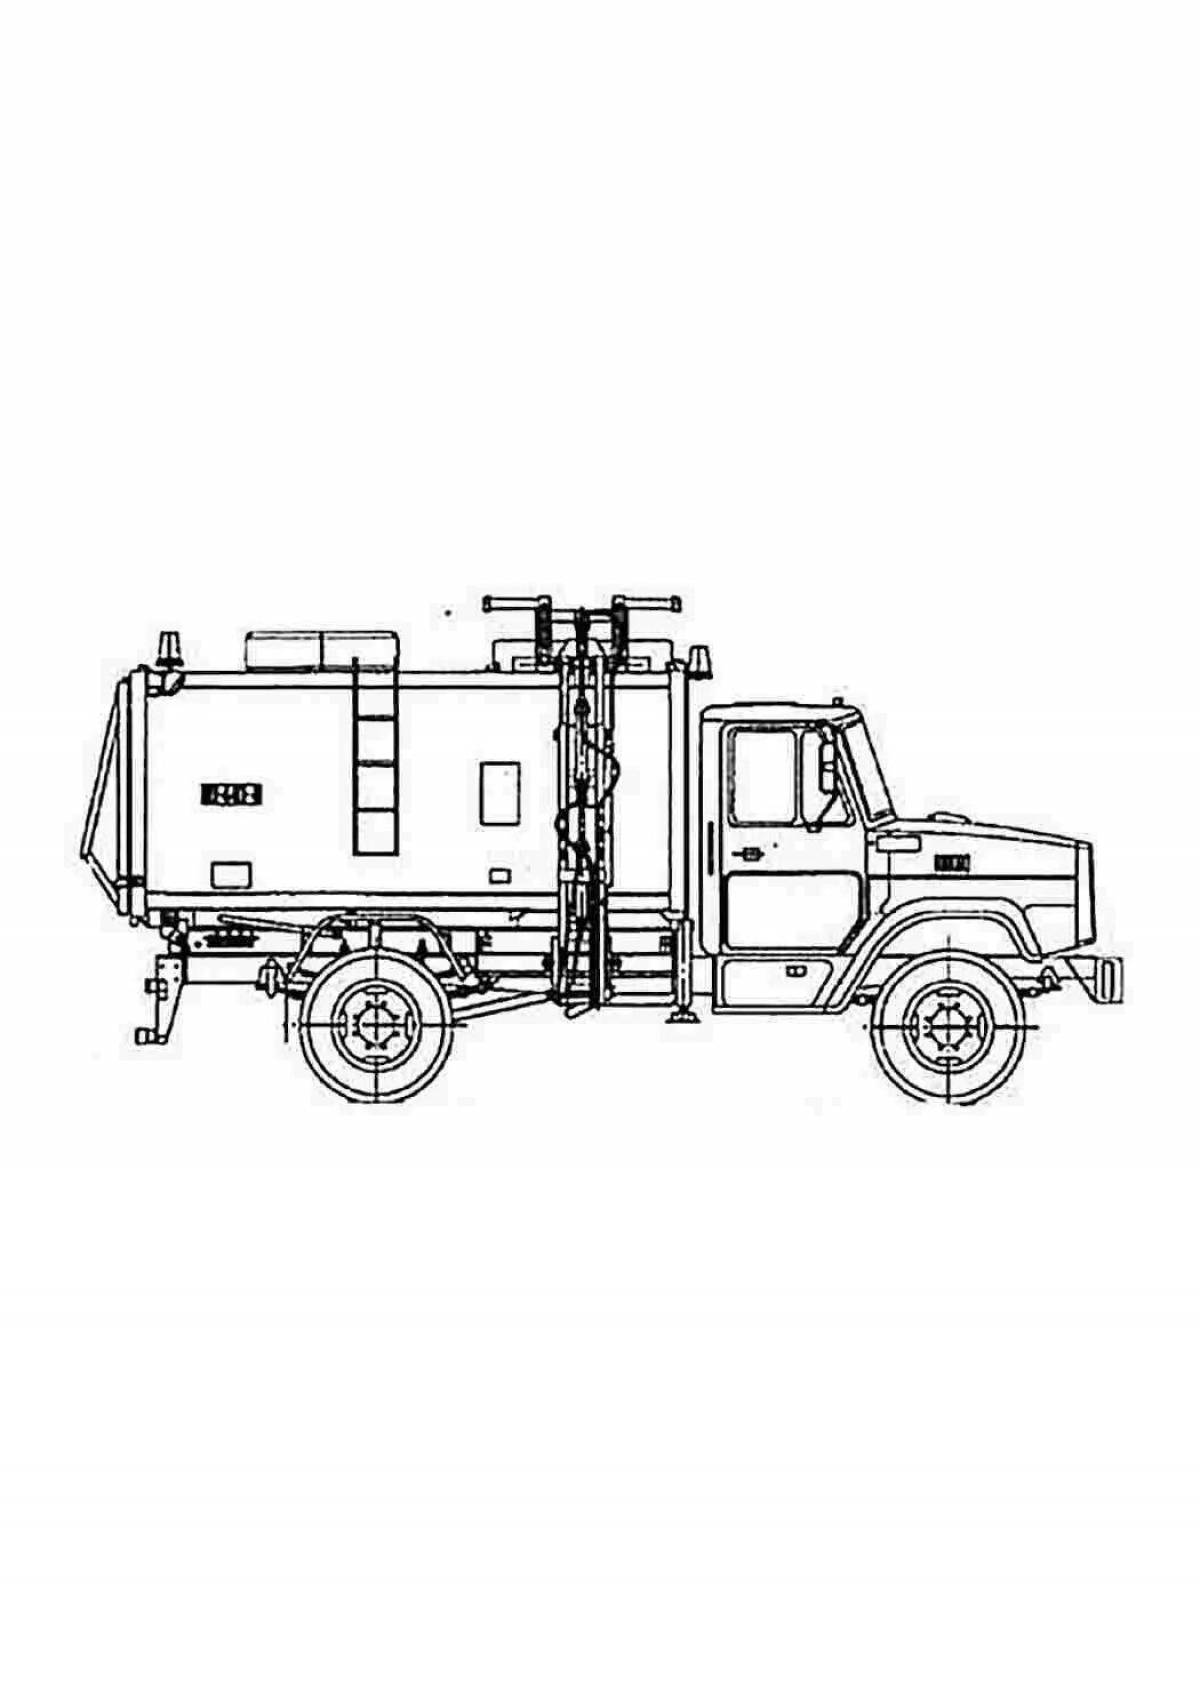 Impressive garbage truck coloring book for 4-5 year olds